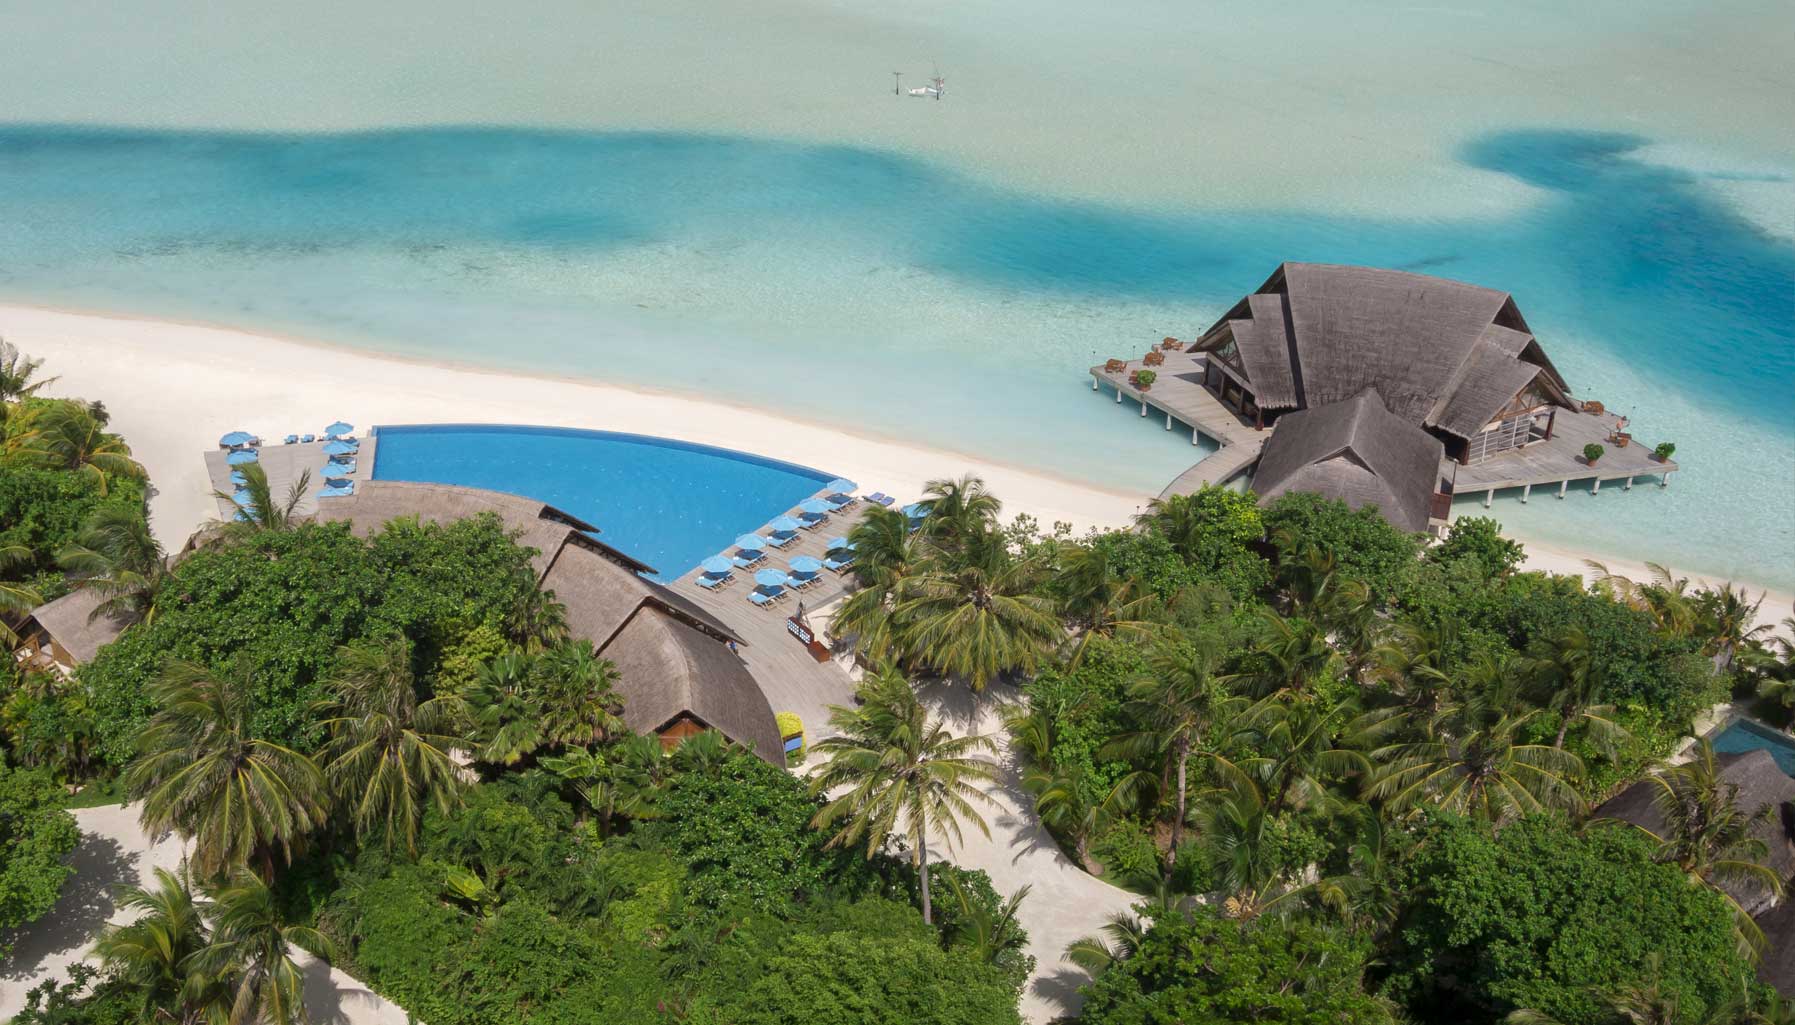 Anantara Dhigu's freediving facility opens your eyes to a whole new world